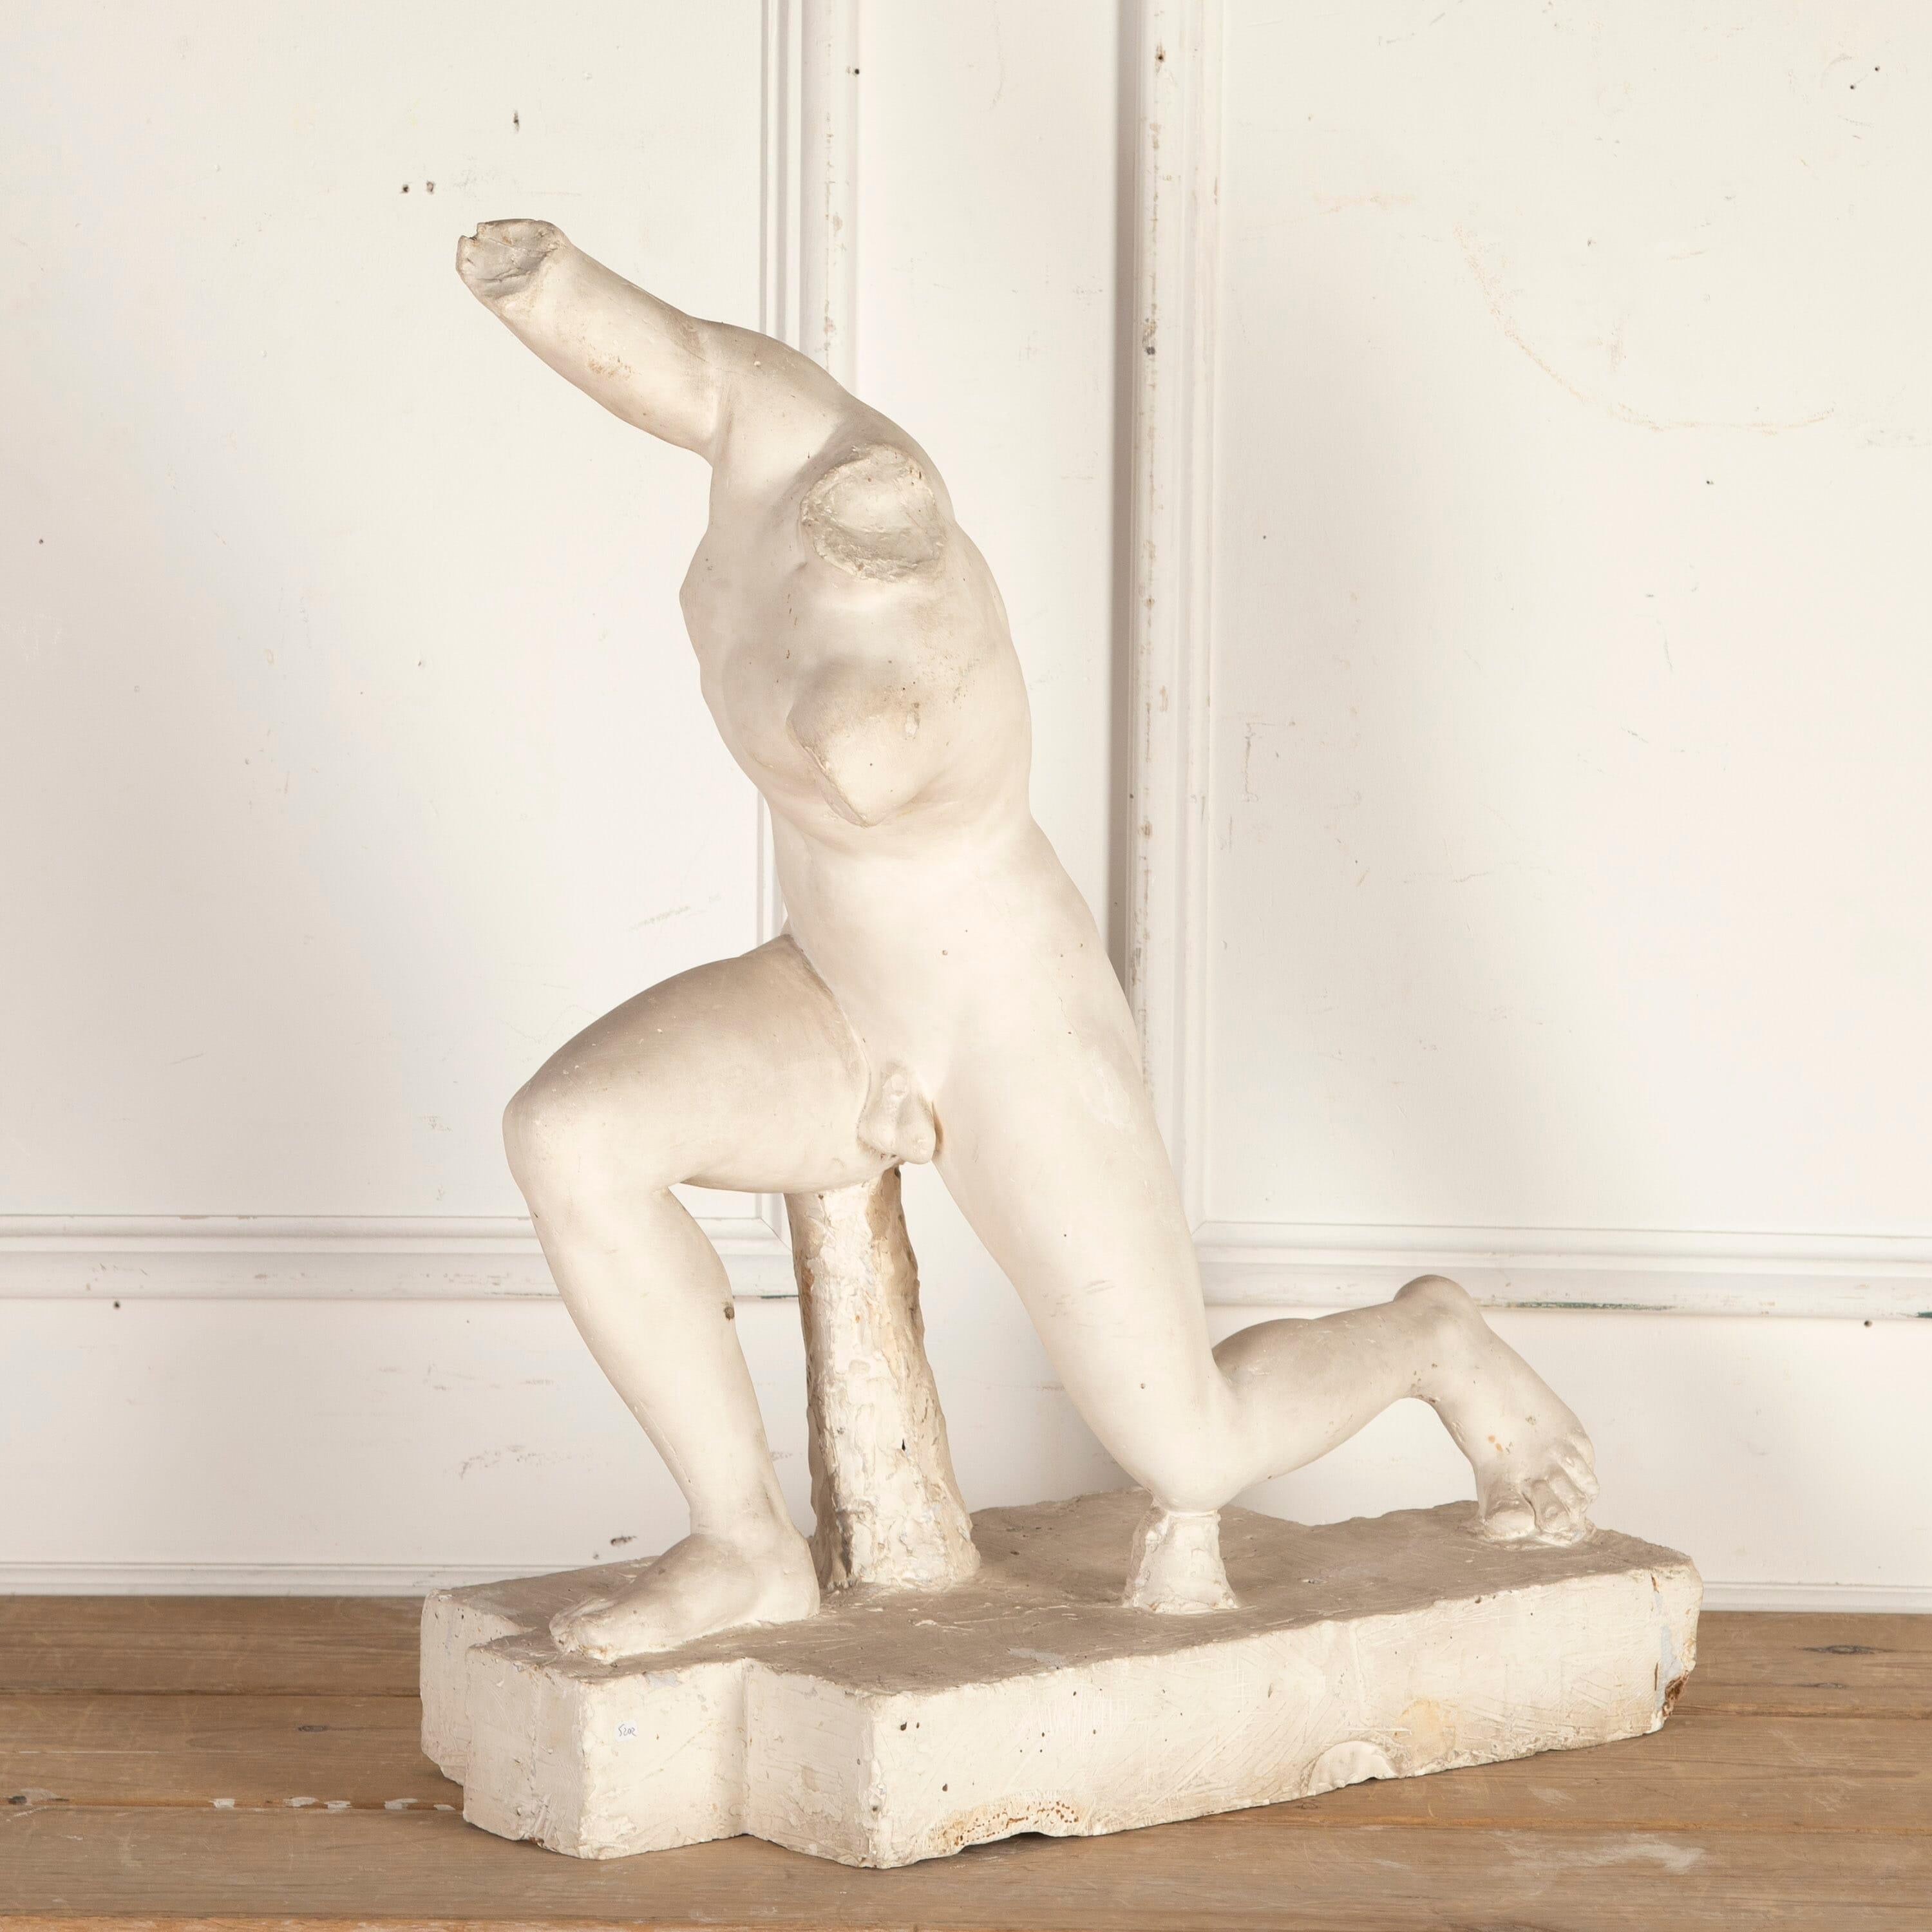 French 19th century plaster statue of a classical figure.

This statue is missing his head and arms, but was likely made after the iconic ancient Greek statue of Discobolus. The original Discobolus of Myron was completed around 460-450 BC and